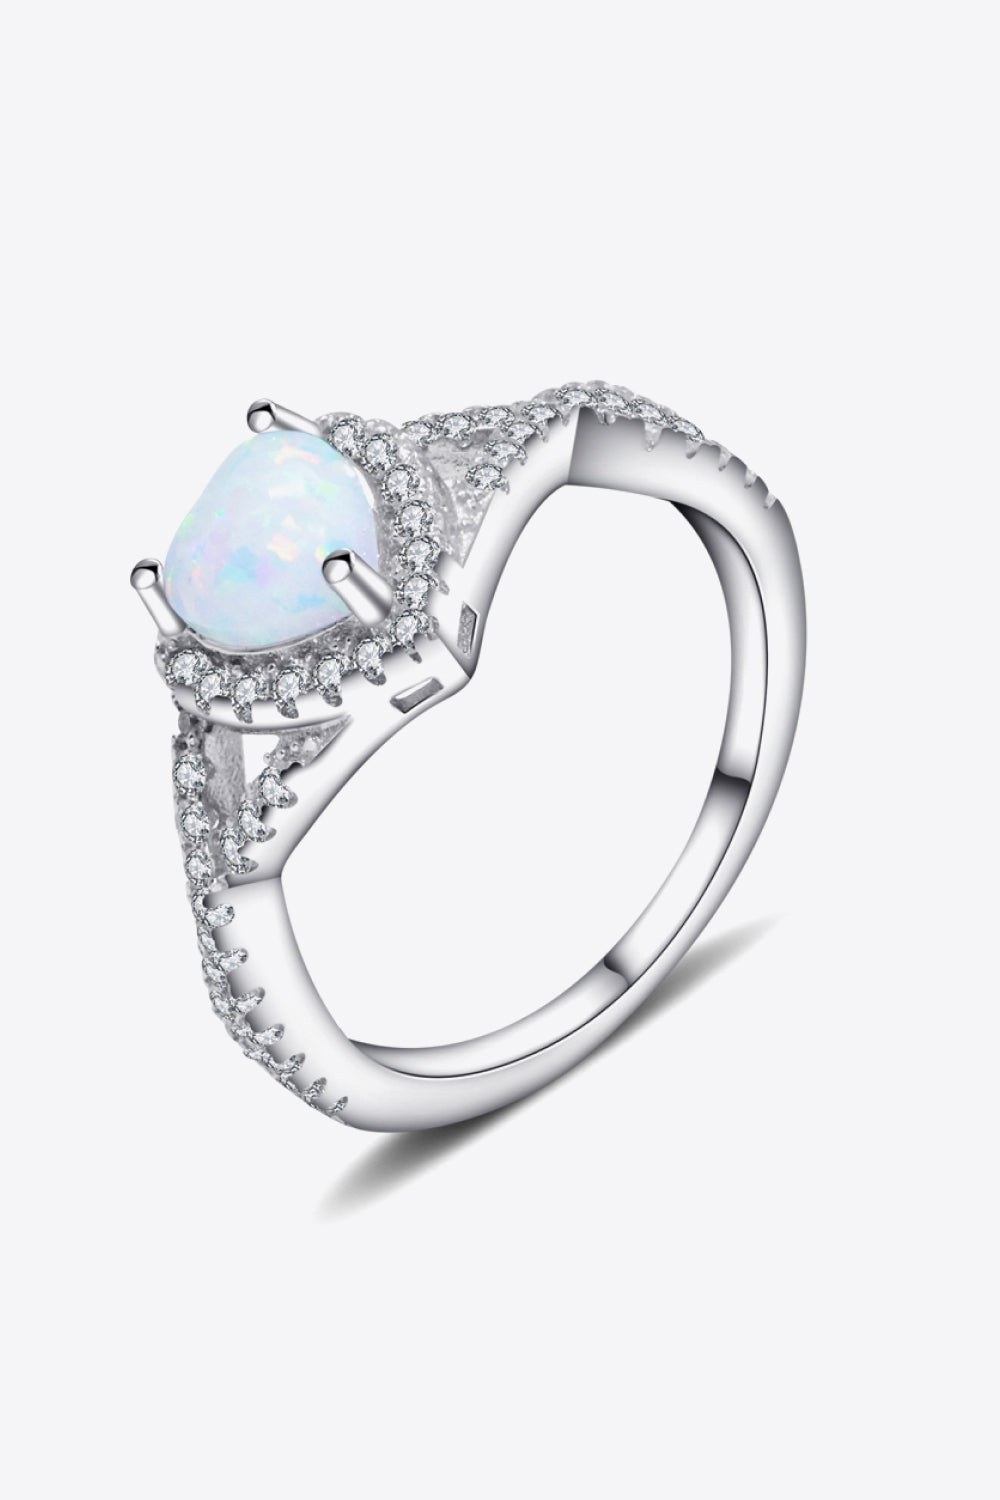 925 Sterling Silver Heart Opal Crisscross Ring - Tophatter Shopping Deals - Electronics, Jewelry, Auction, App, Bidding, Gadgets, Fashion